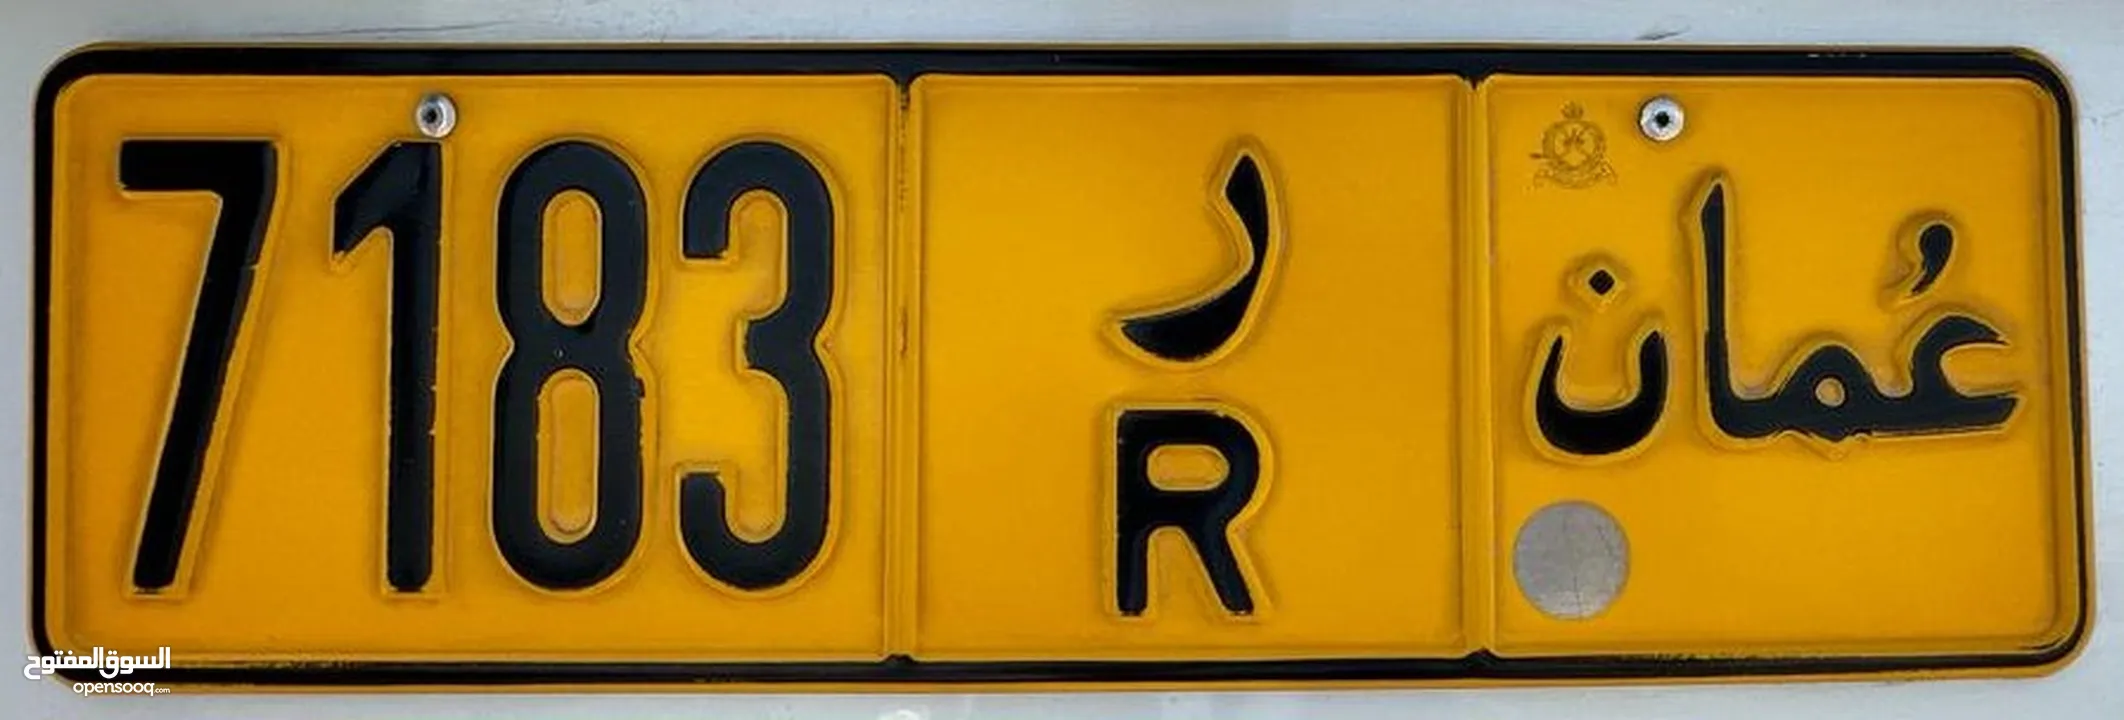 Number Plate - 7183 R